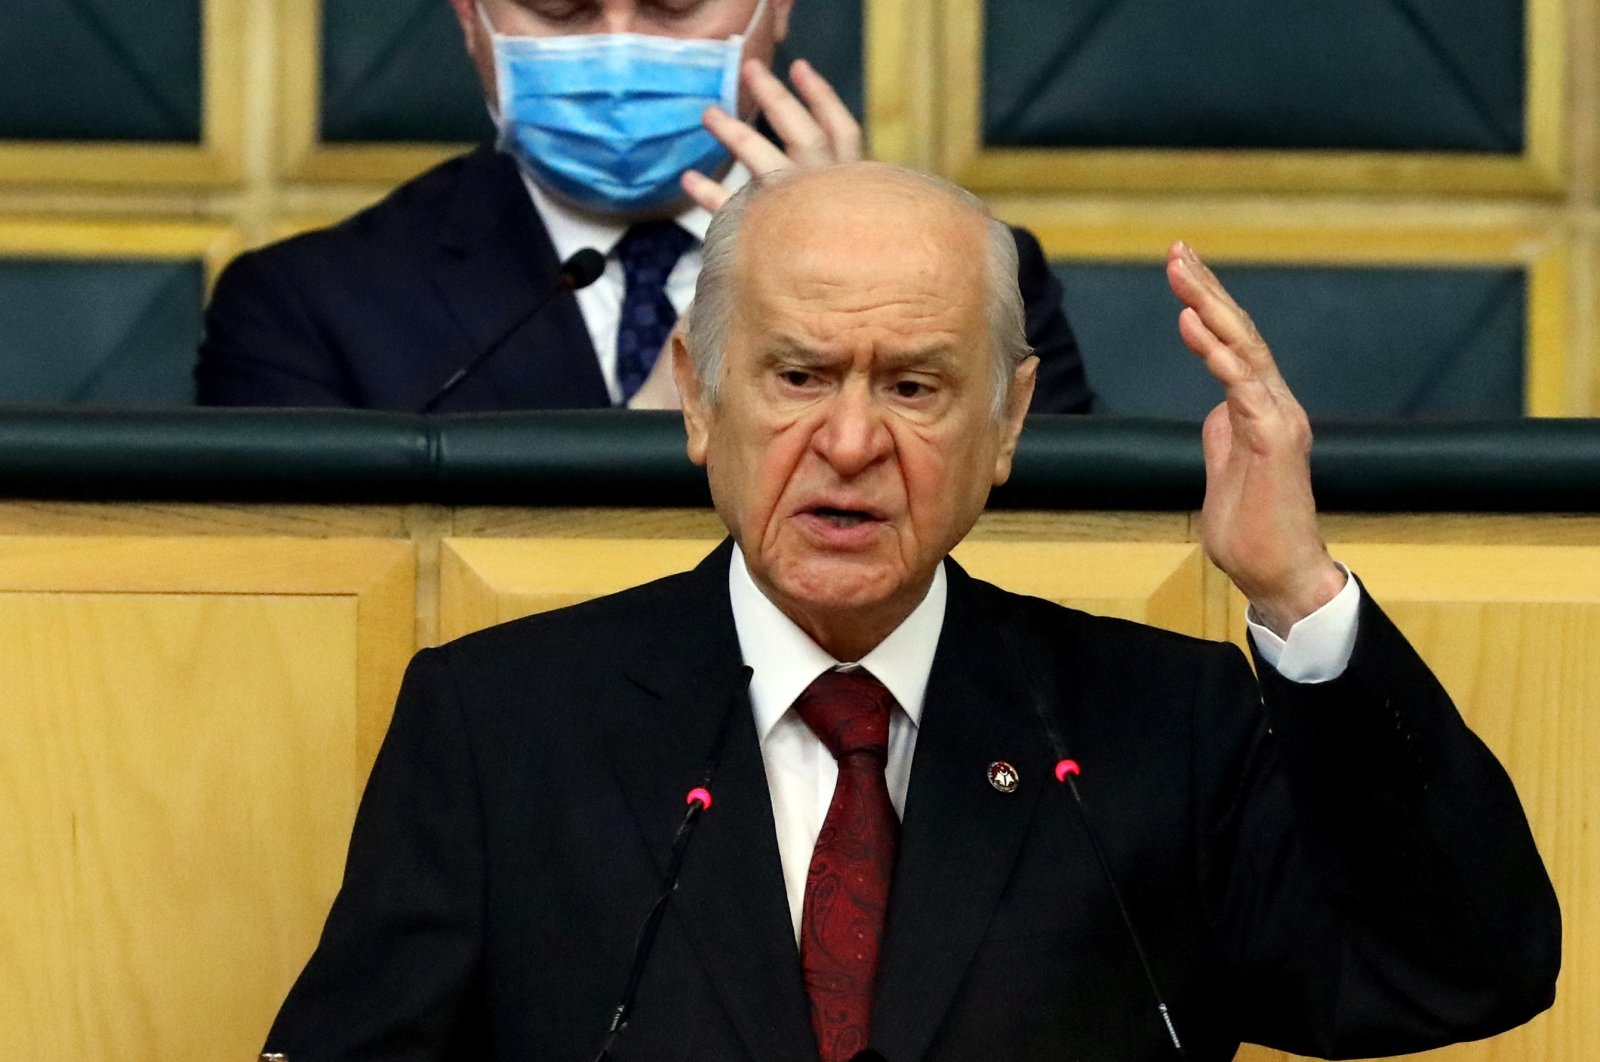 MHP Chairperson Devlet Bahçeli speaks at the MHP parliamentary group meeting in the capital Ankara on Feb. 16, 2021. (AA Photo)